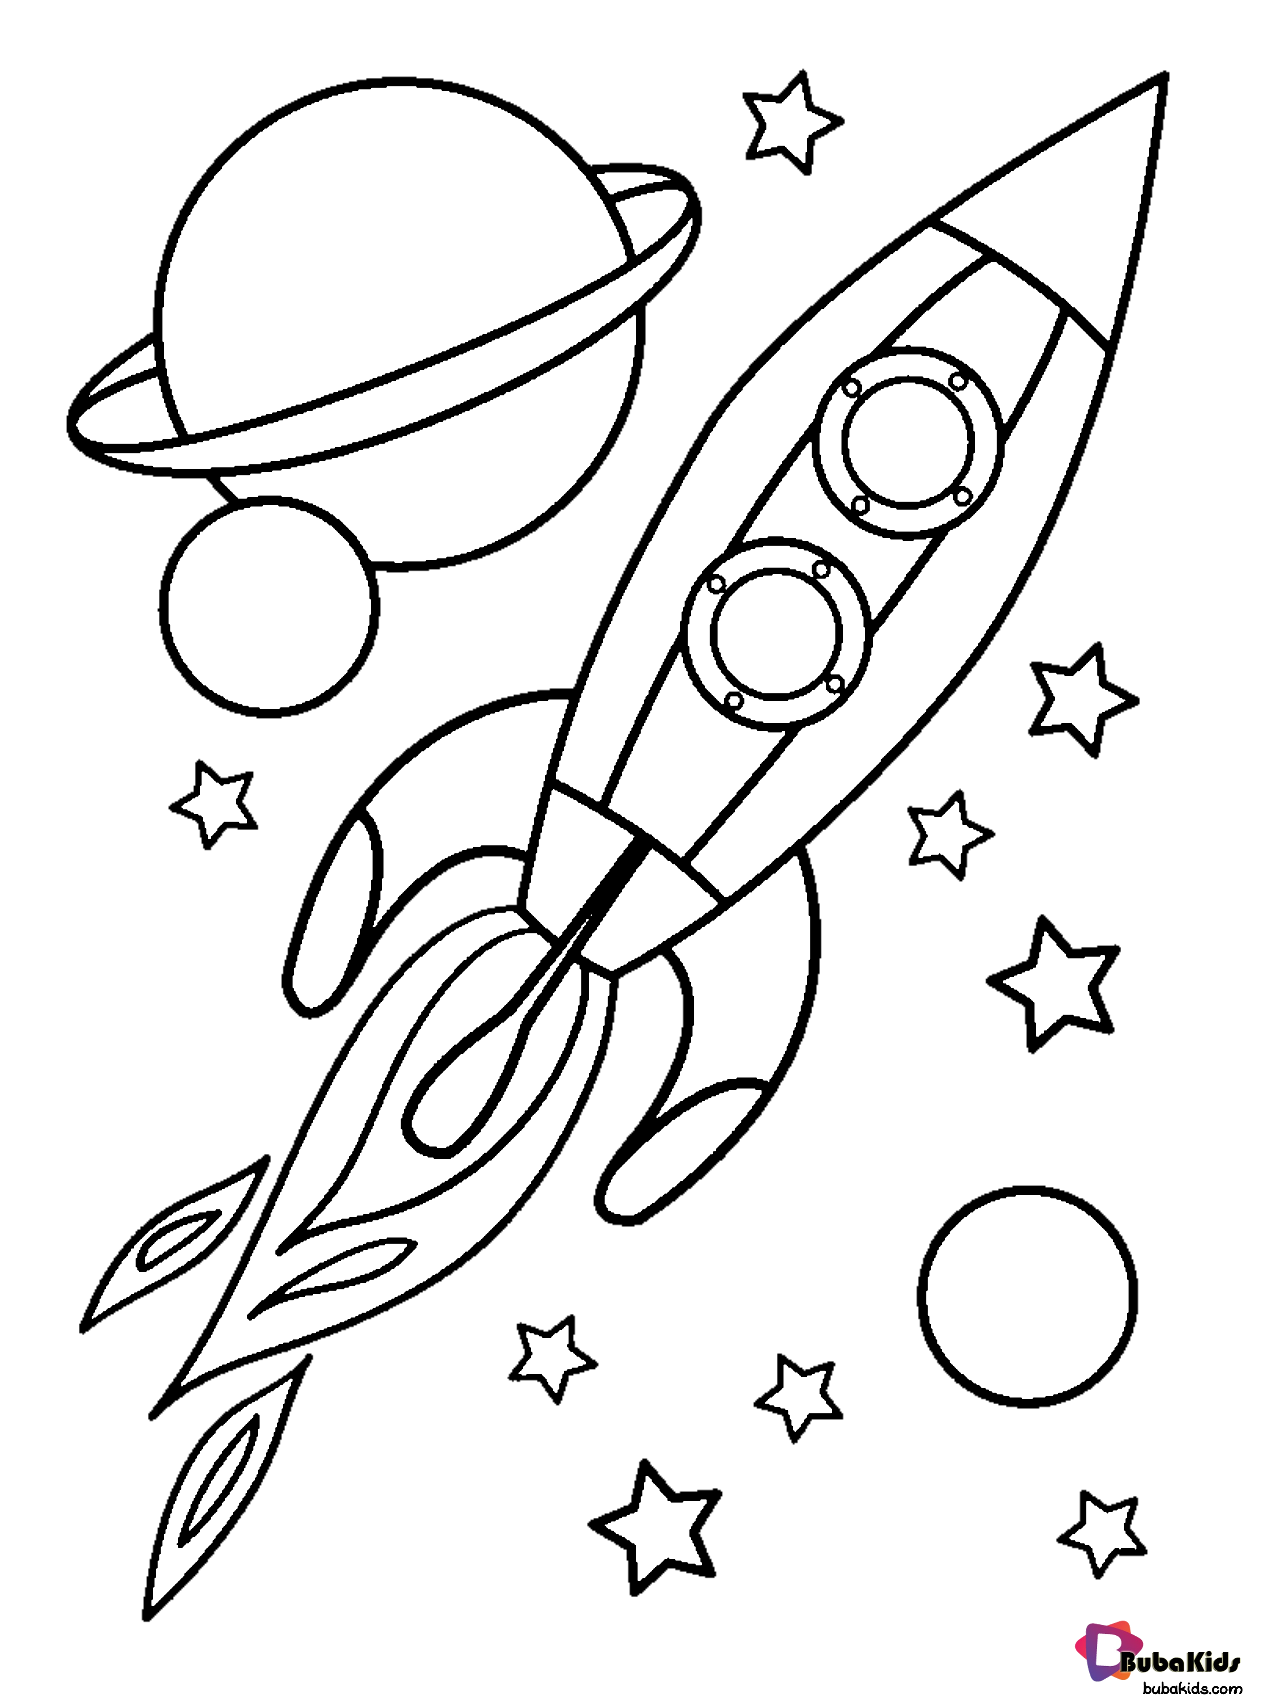 Planets stars and rocket in outer space coloring page Wallpaper